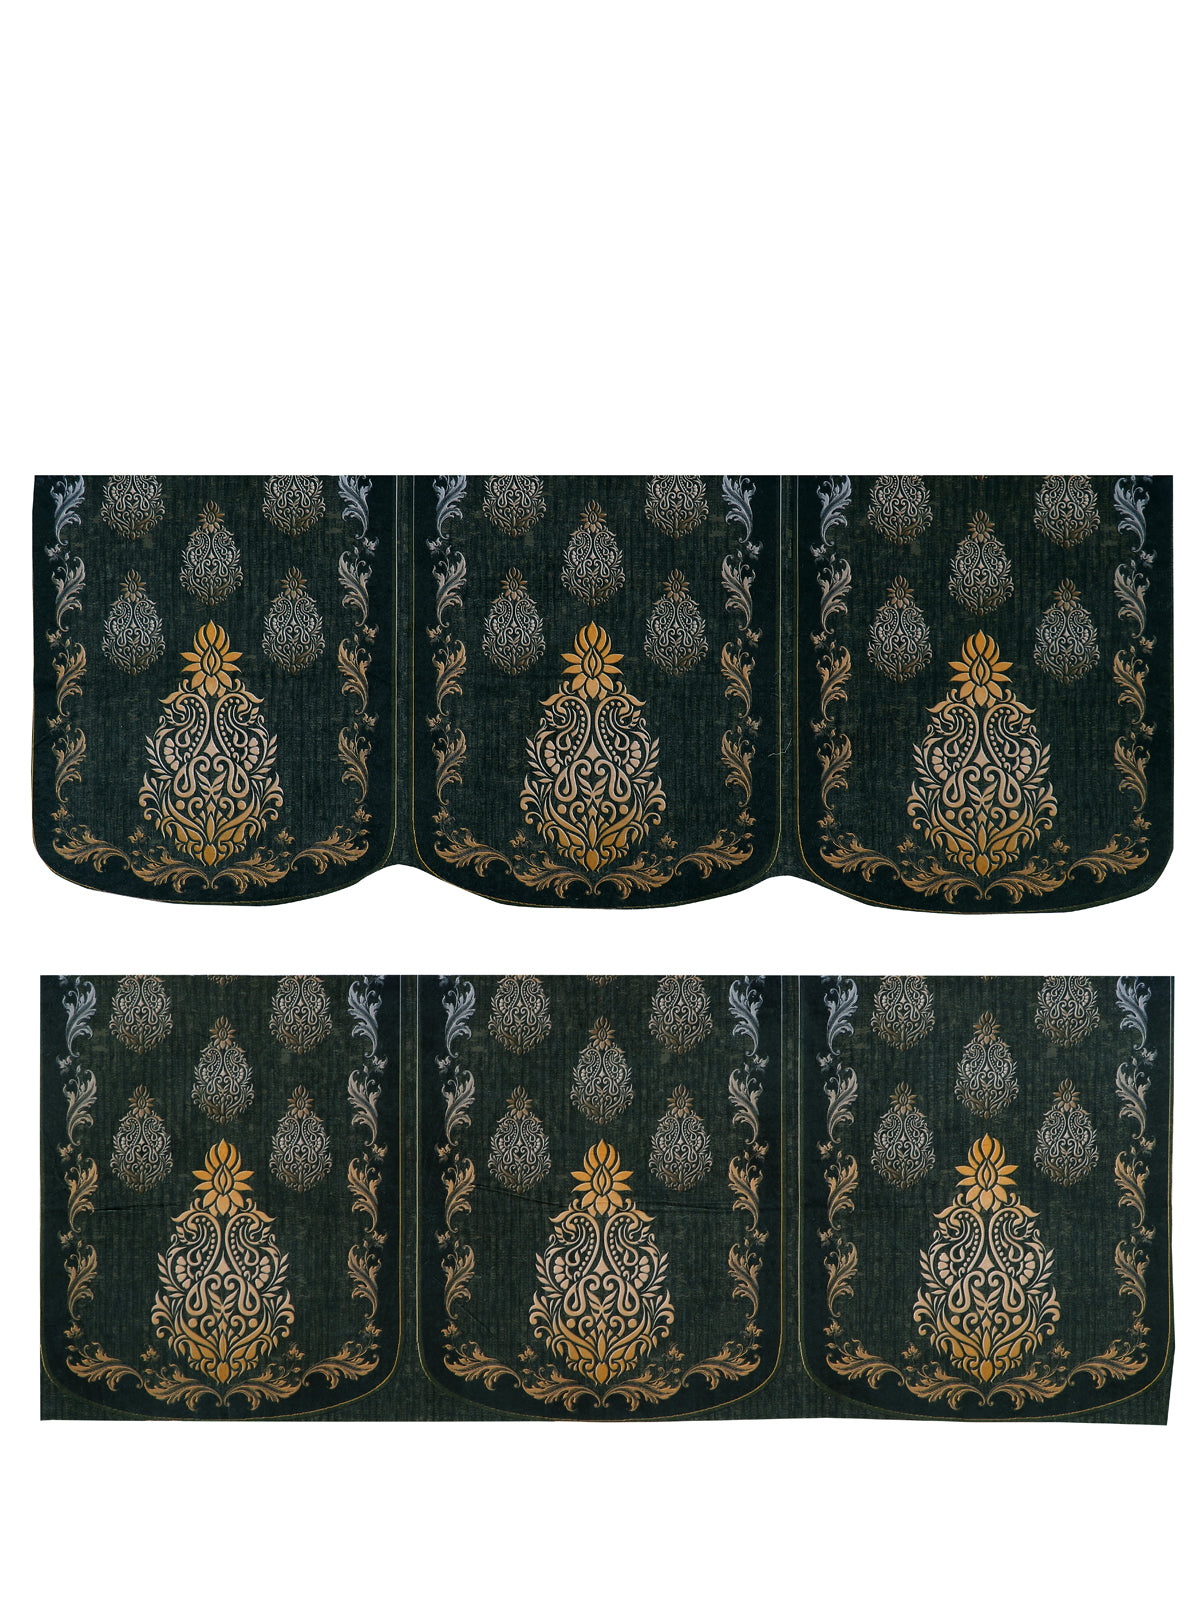 Green & Gold Damask Patterned 5 Seater Sofa Cover Set